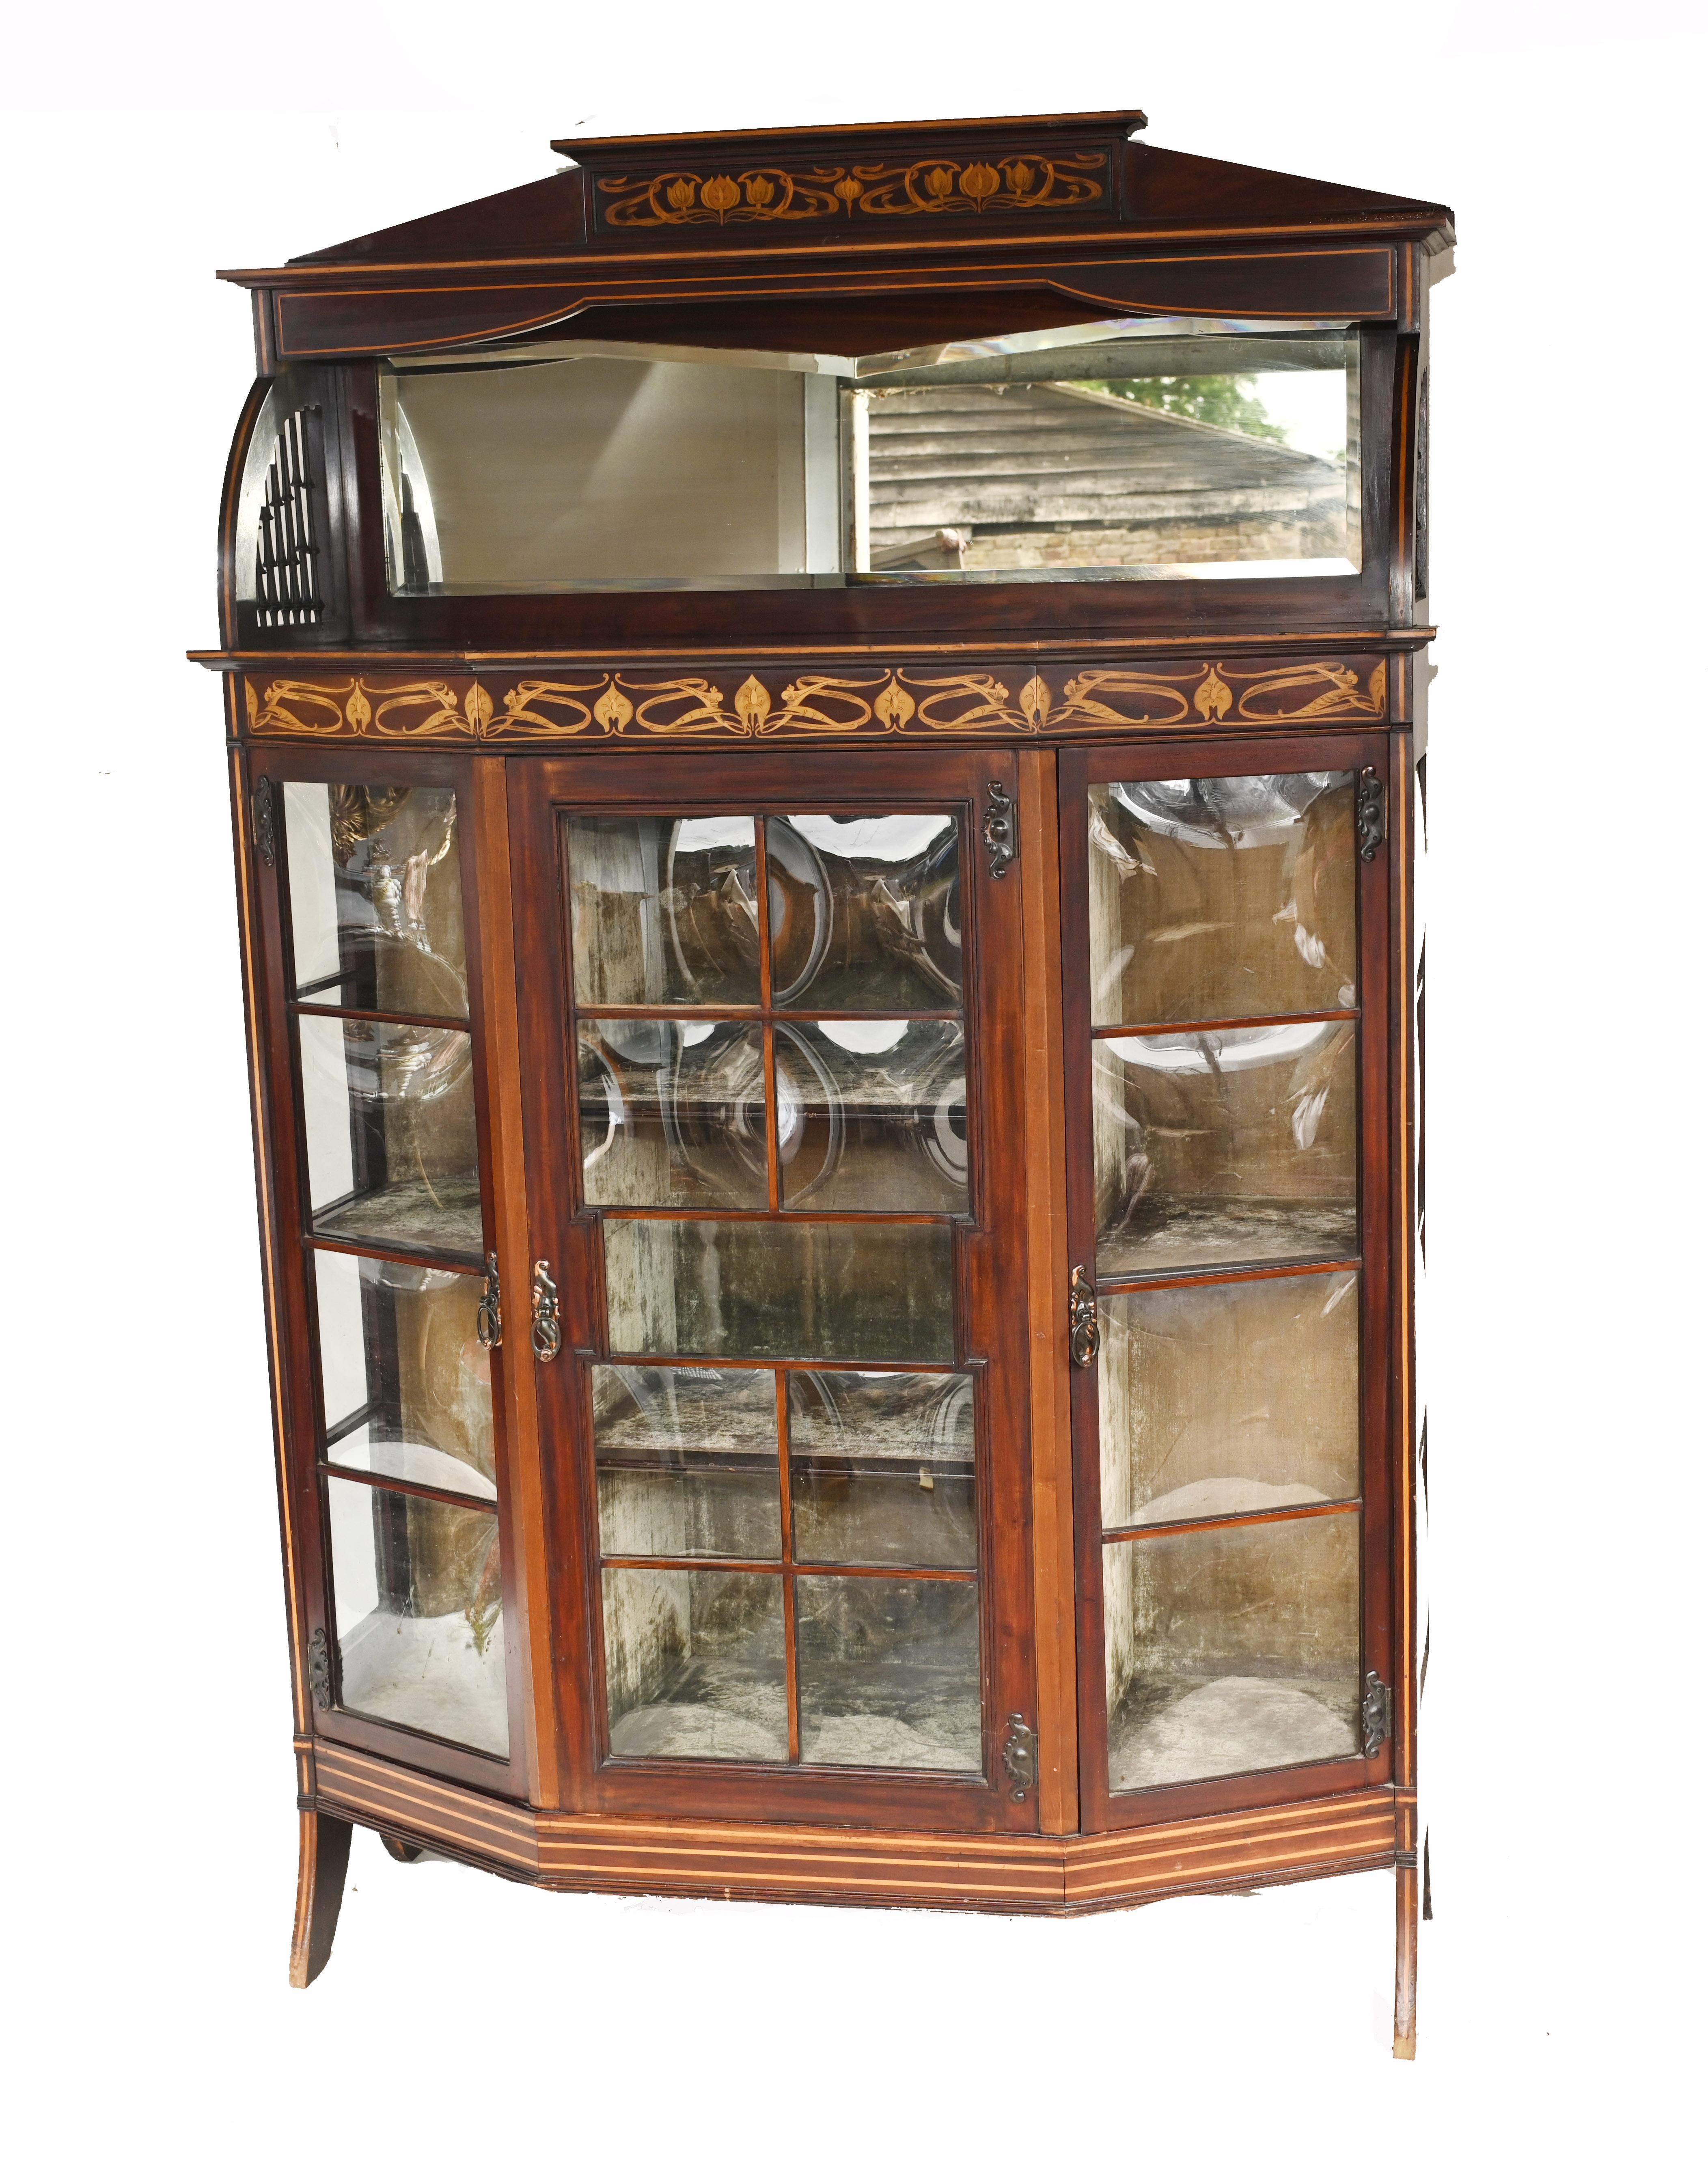 Curvy English art nouveau display cabinet
Made by Golding and Son out of Bolton (please see makers stamp)
The main thing that grabbed our attention was the curved glass
Classic inlay work showing floral motifs
We date this to circa 1900
Some of